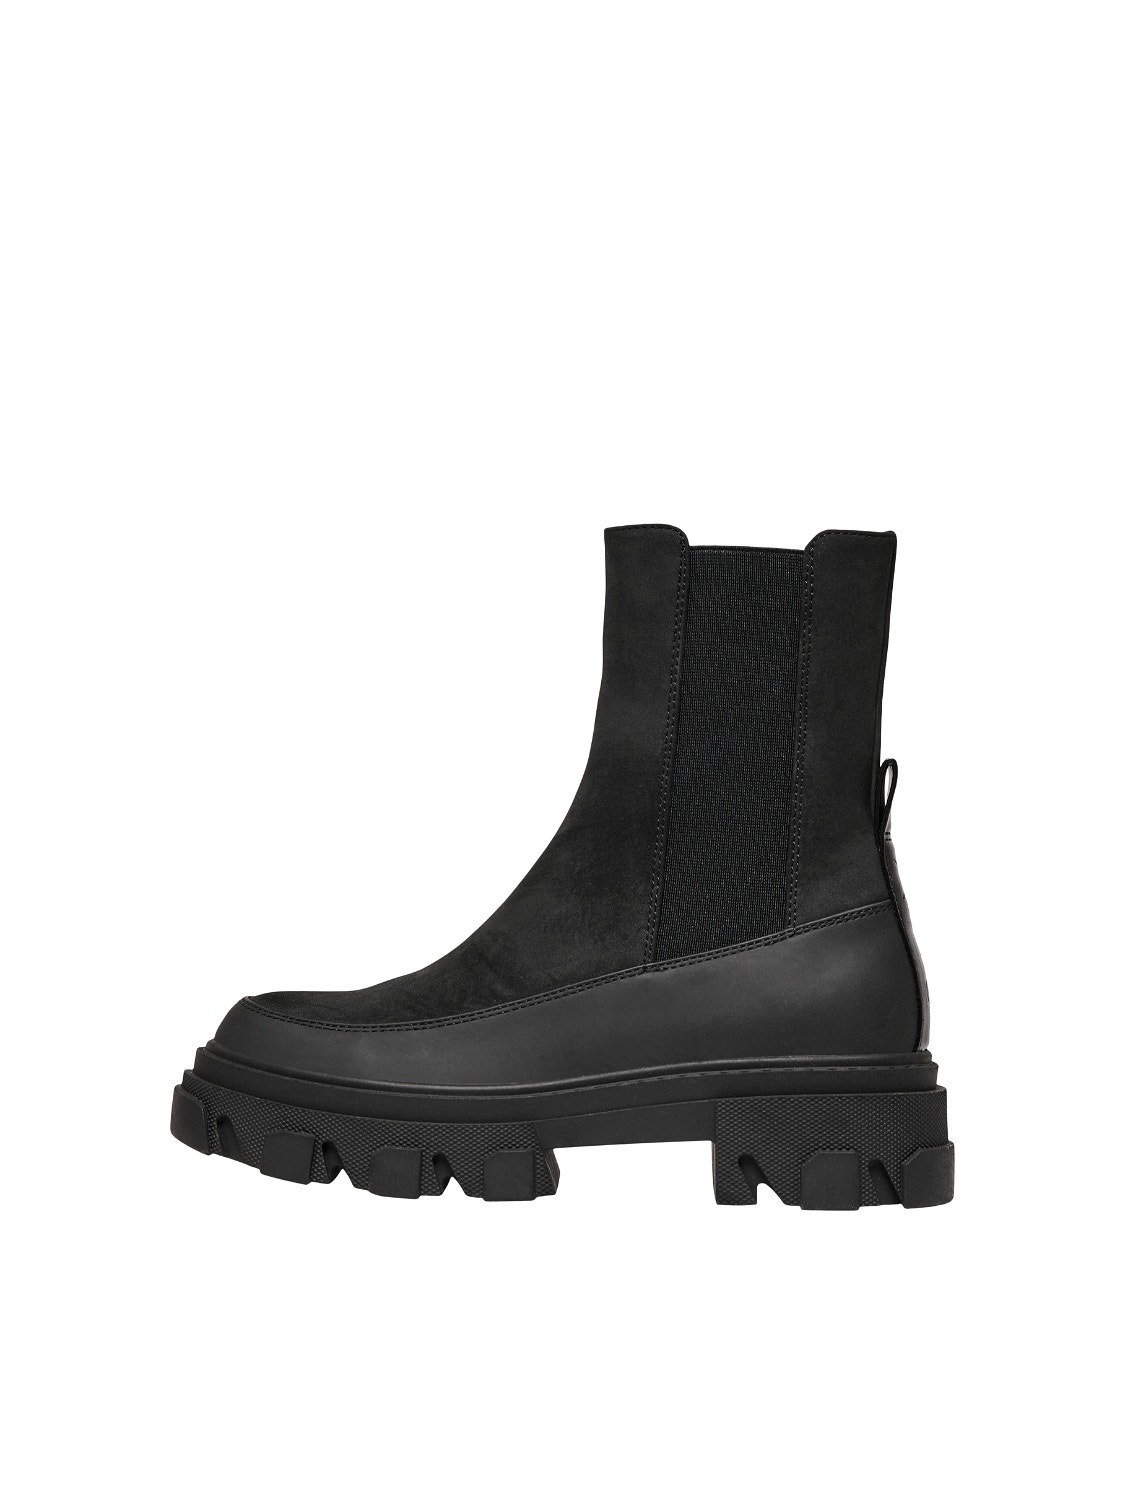 ONLY Chunky Boots -Black - 15238956